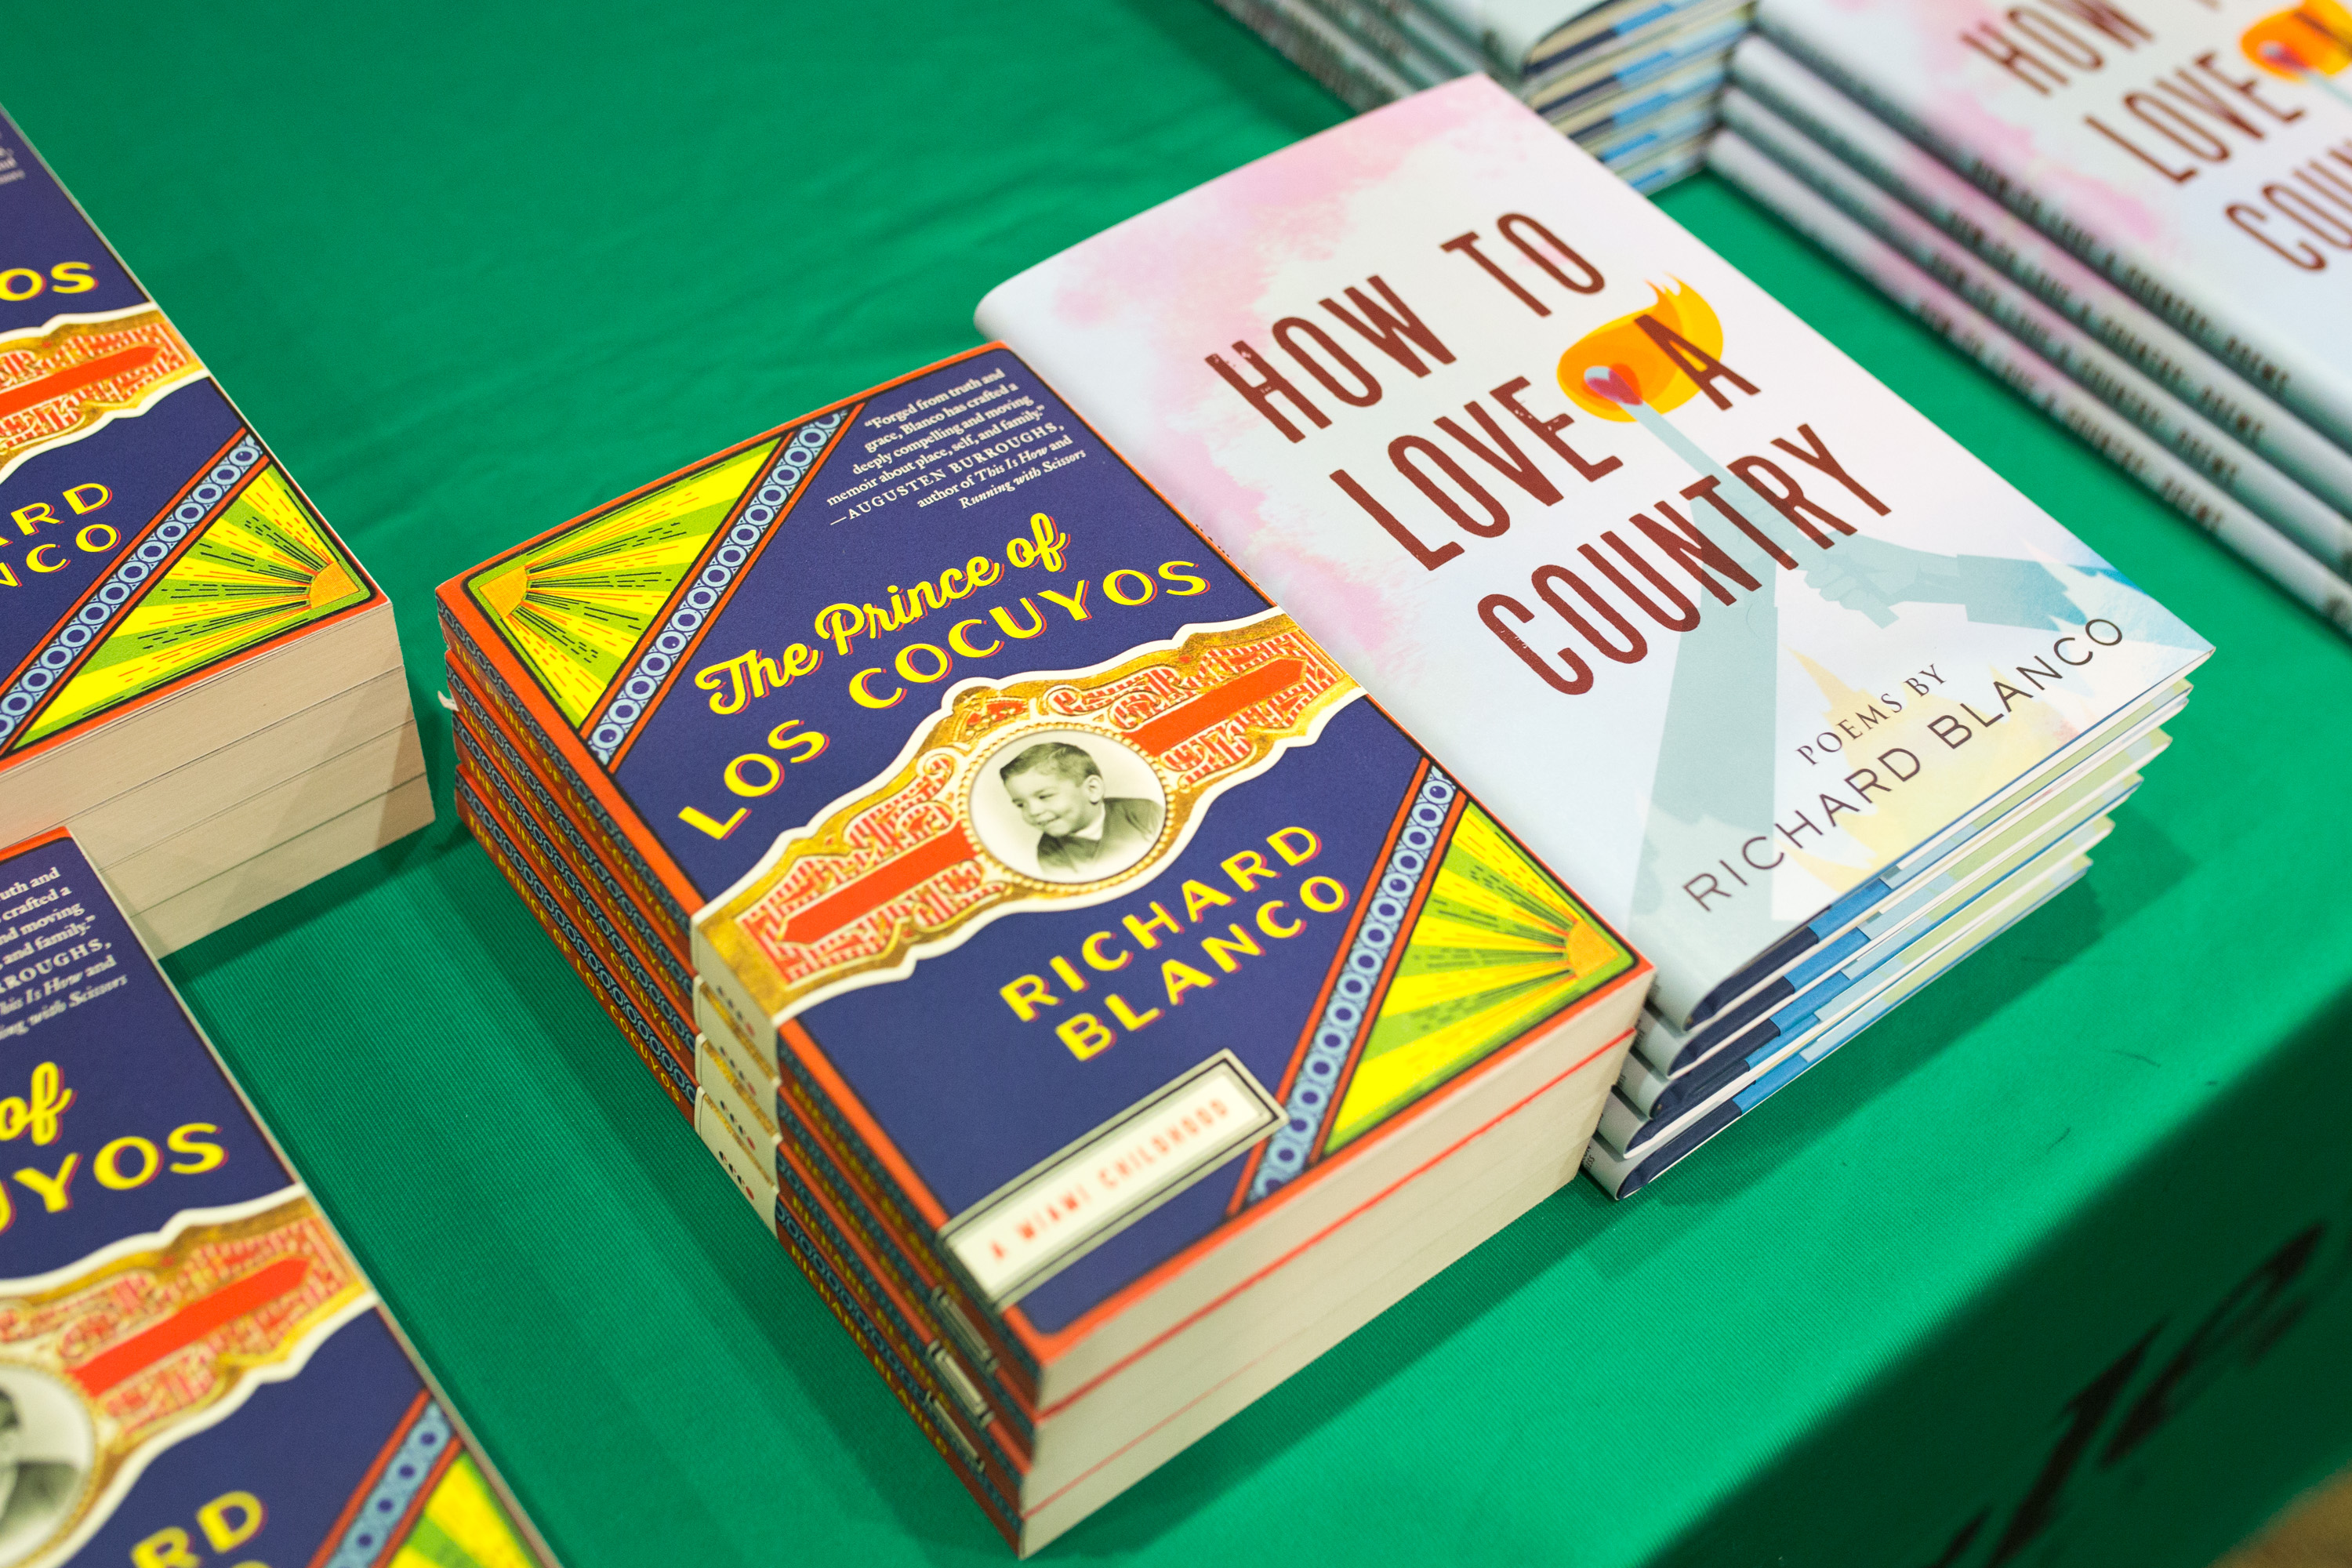 Two stacks of books by Richard Blanco: The Prince of Los Cocuyos and How to Love a Country.